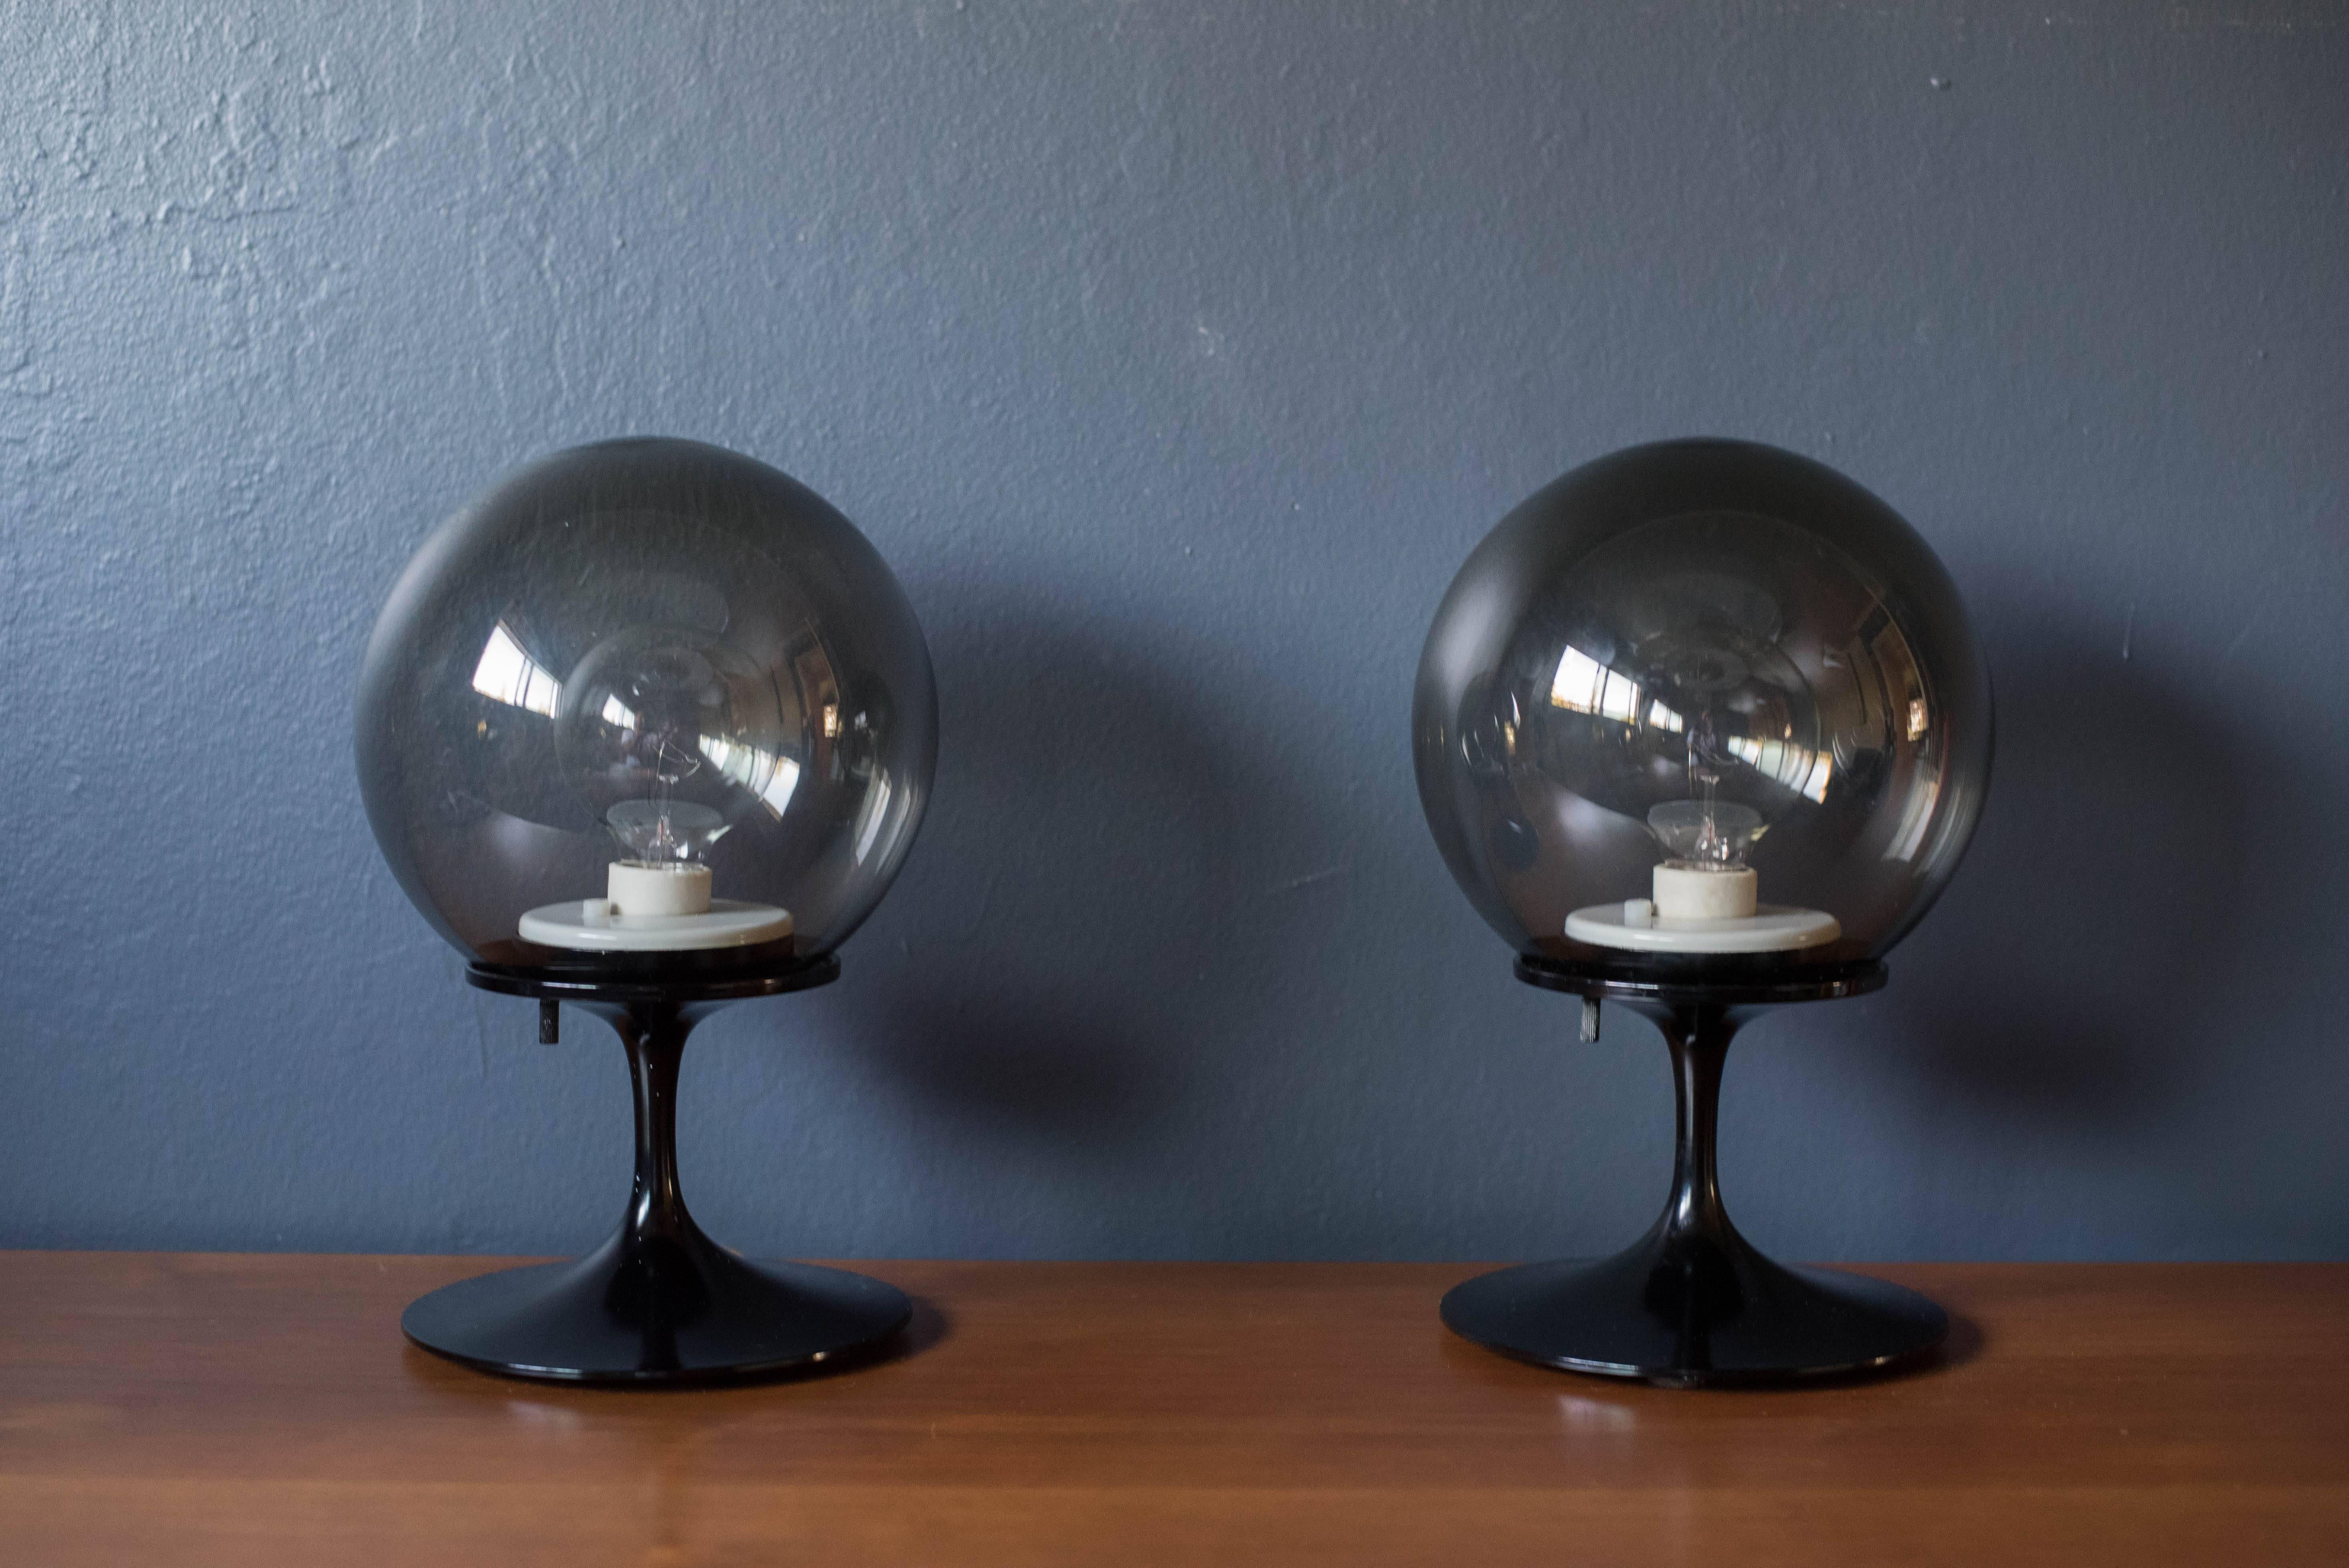 Vintage pair of stemlite lamps by Bill Curry for Design Line. This set features smoked glass globes and a tulip base with black enamel finish.



Offered by Mid Century Maddist